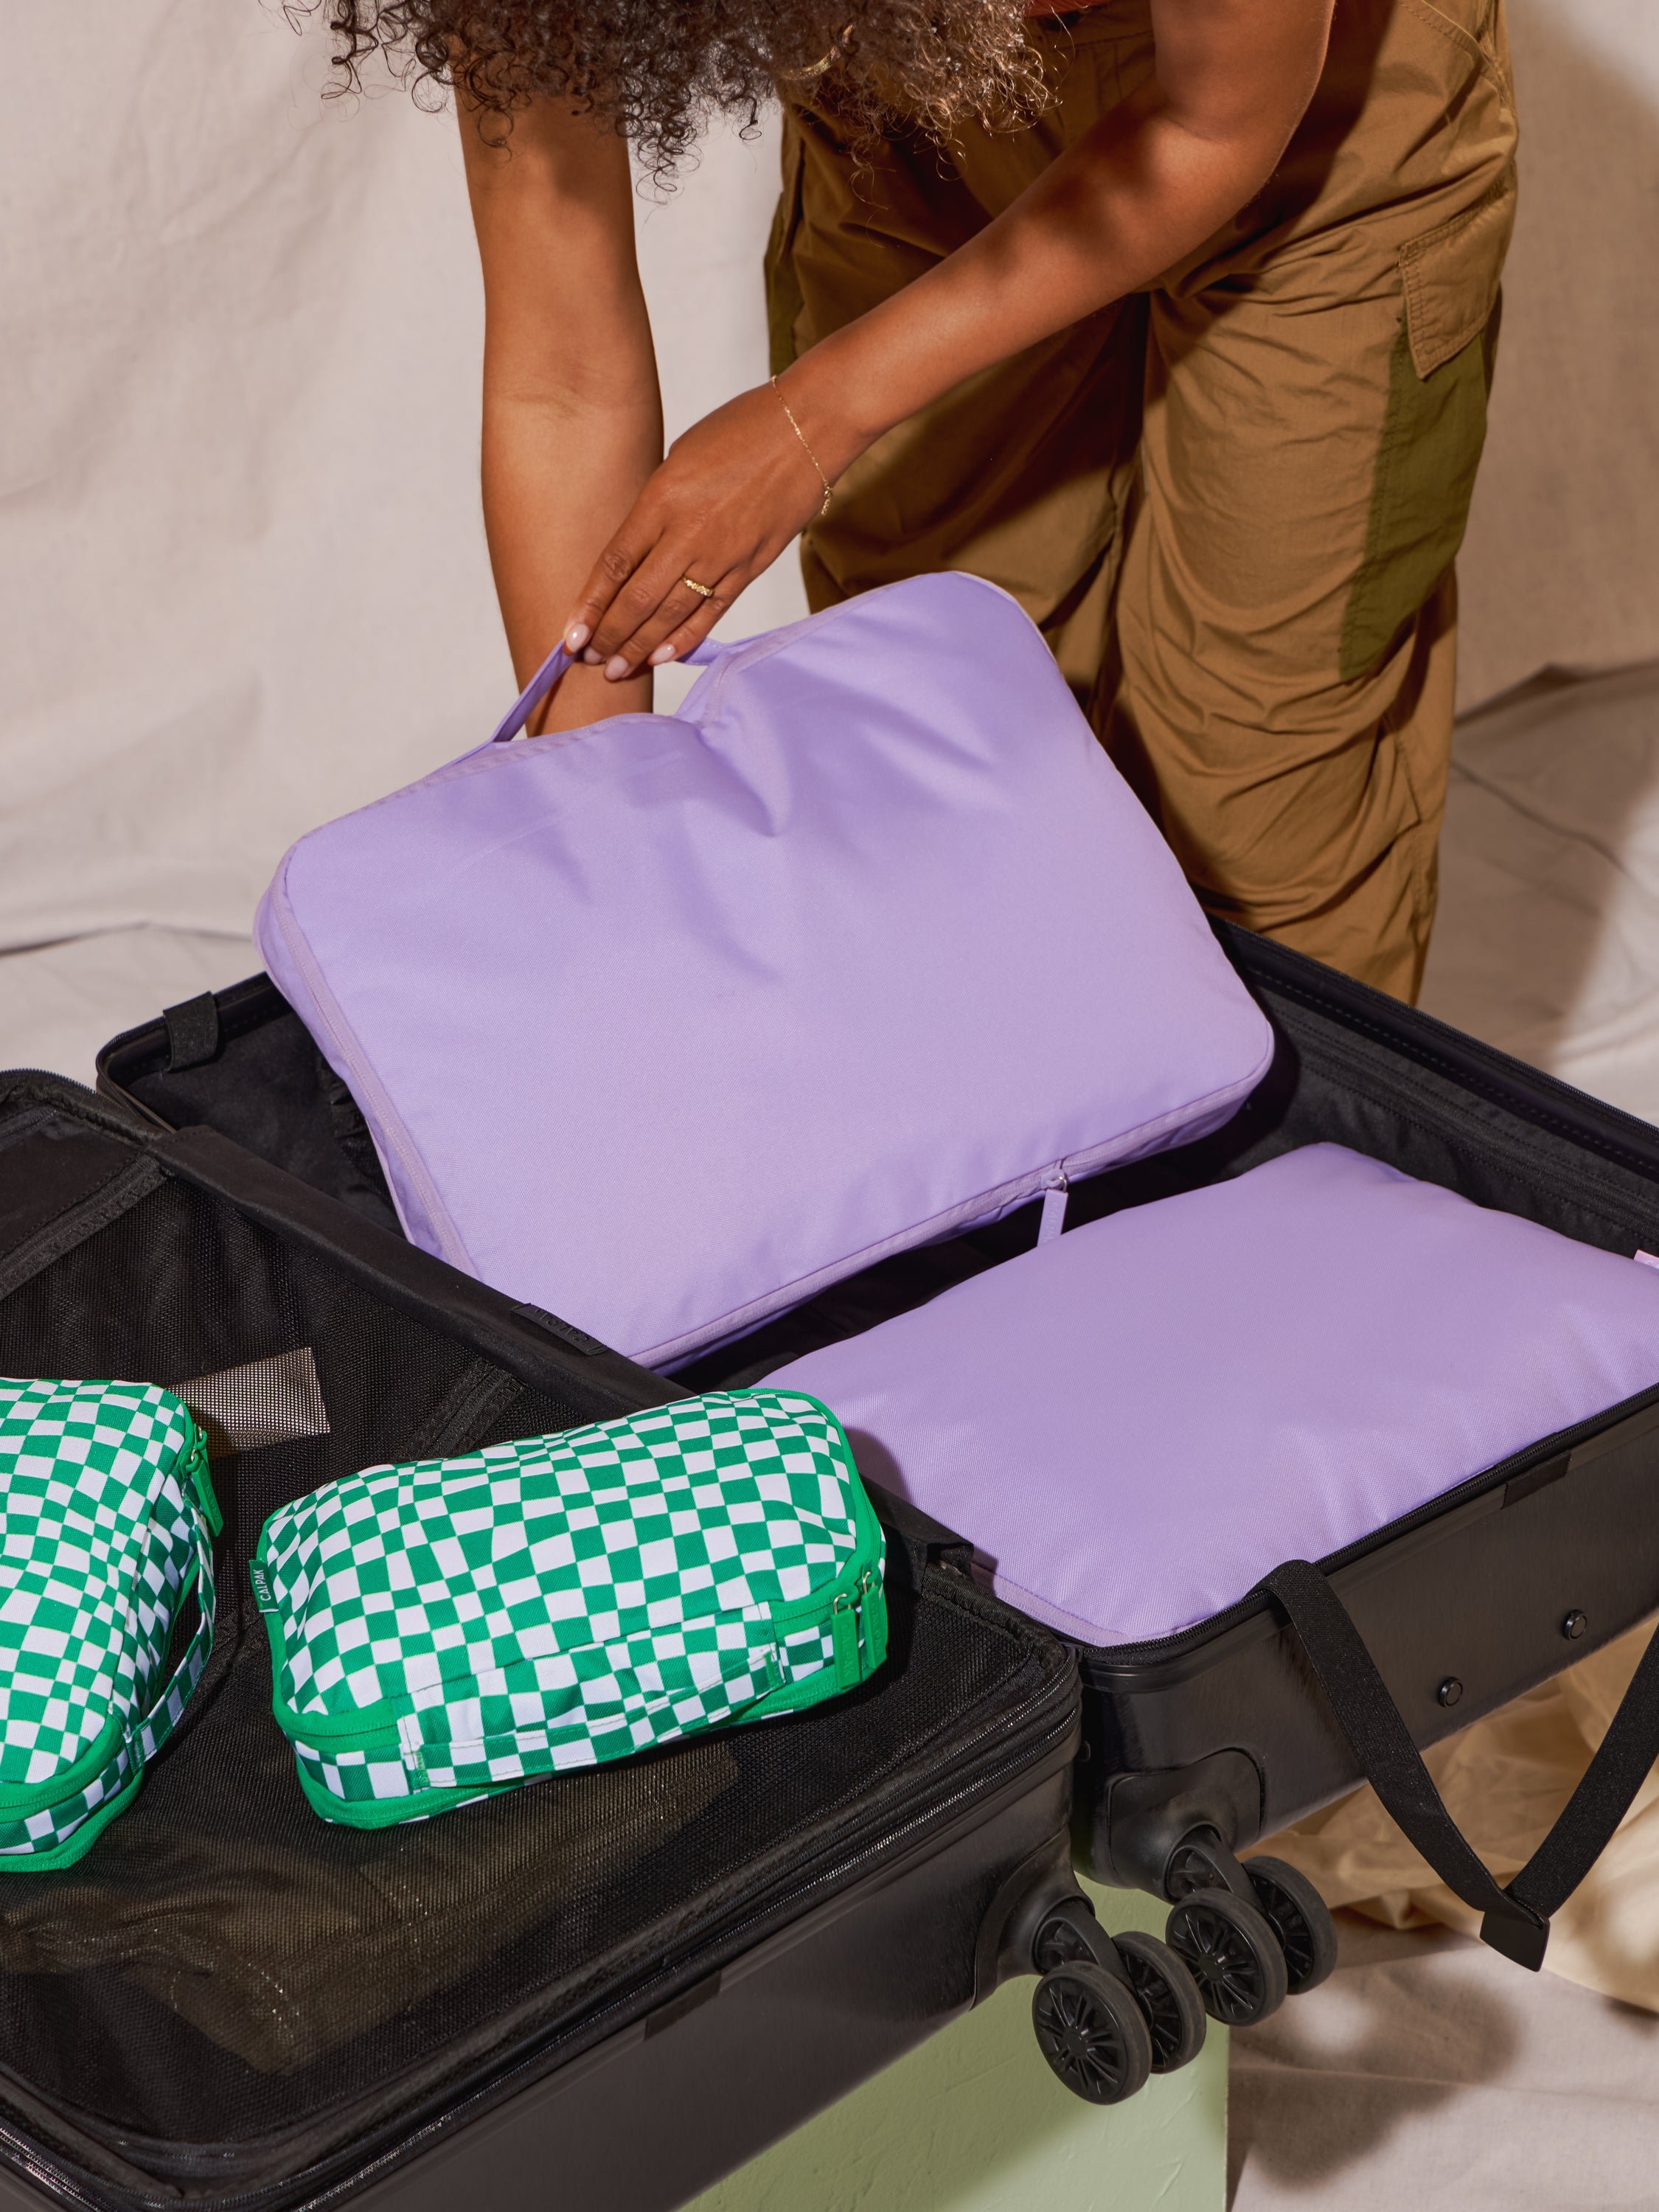 Model placing CALPAK Large Compression Cubes in orchid and CALPAK Small Compression Packing Cubes in green checkerboard within luggage